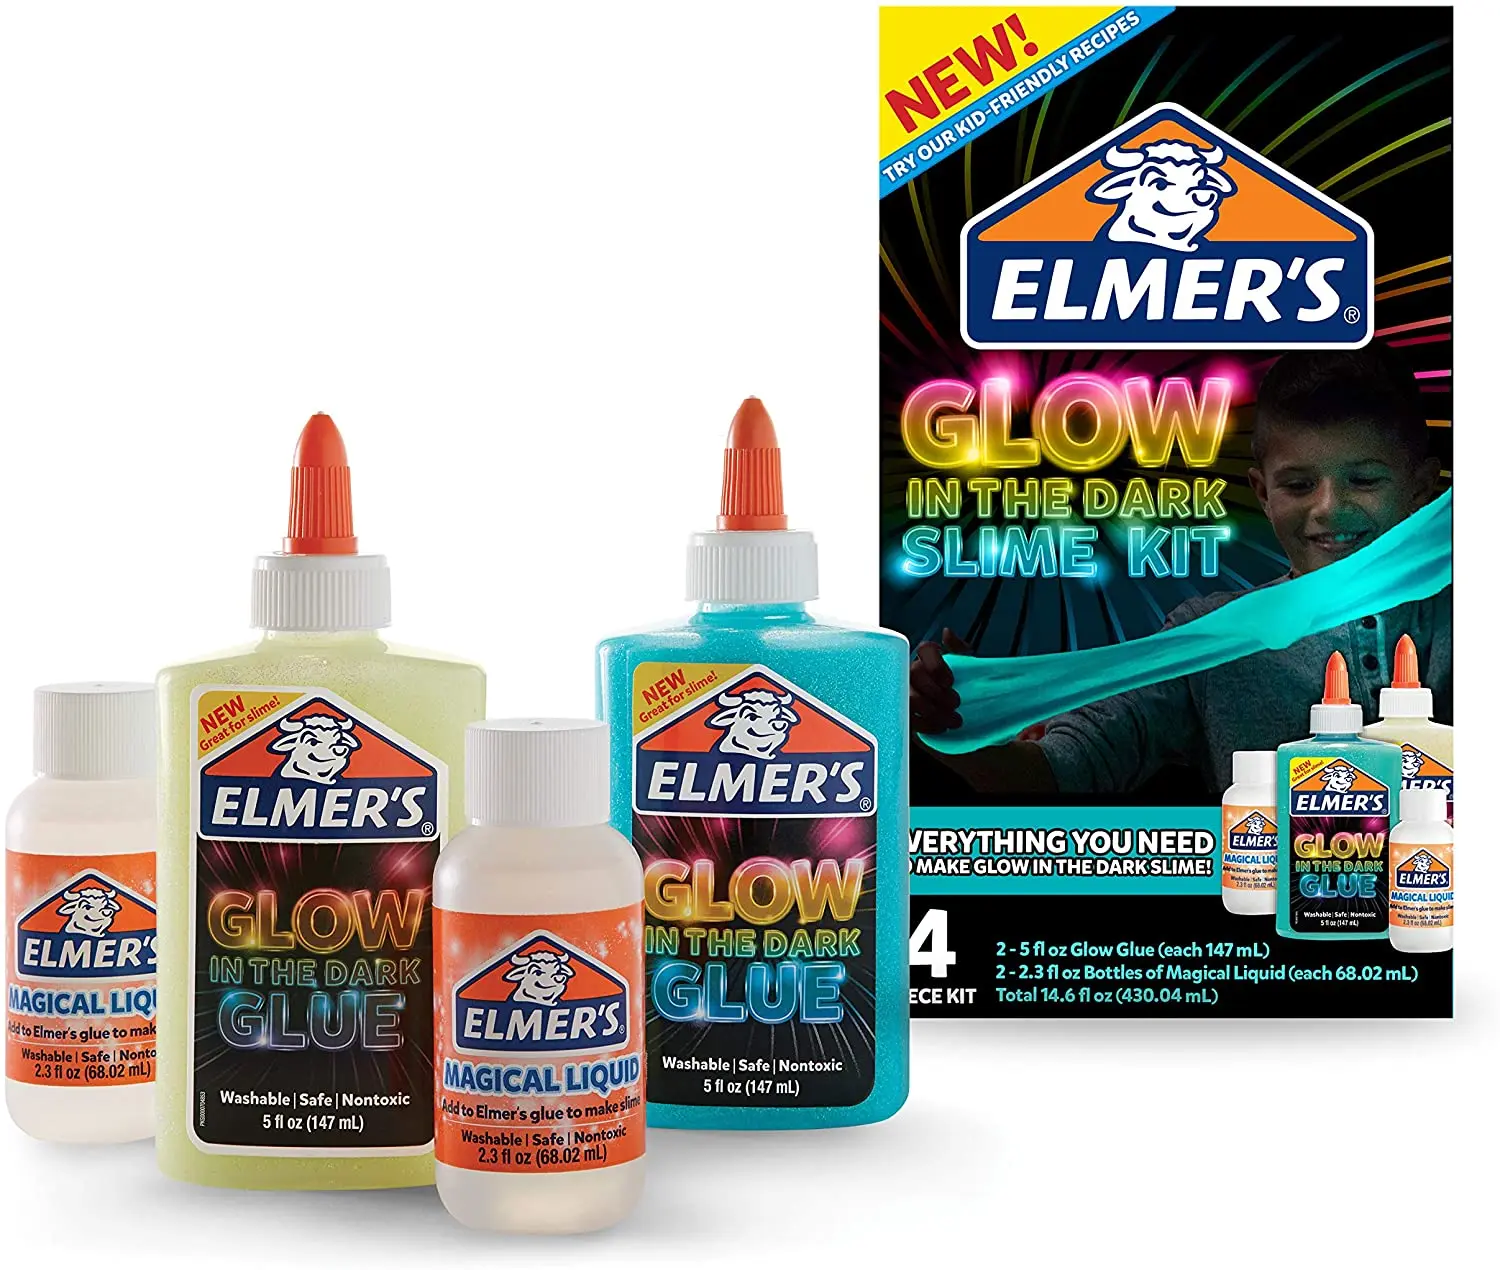 

Elmer's Glow-in-the-Dark Slime Kit Slime Supplies Include Glow In The Dark Glue, Magical Liquid Slime Activator 4 Piece Kit